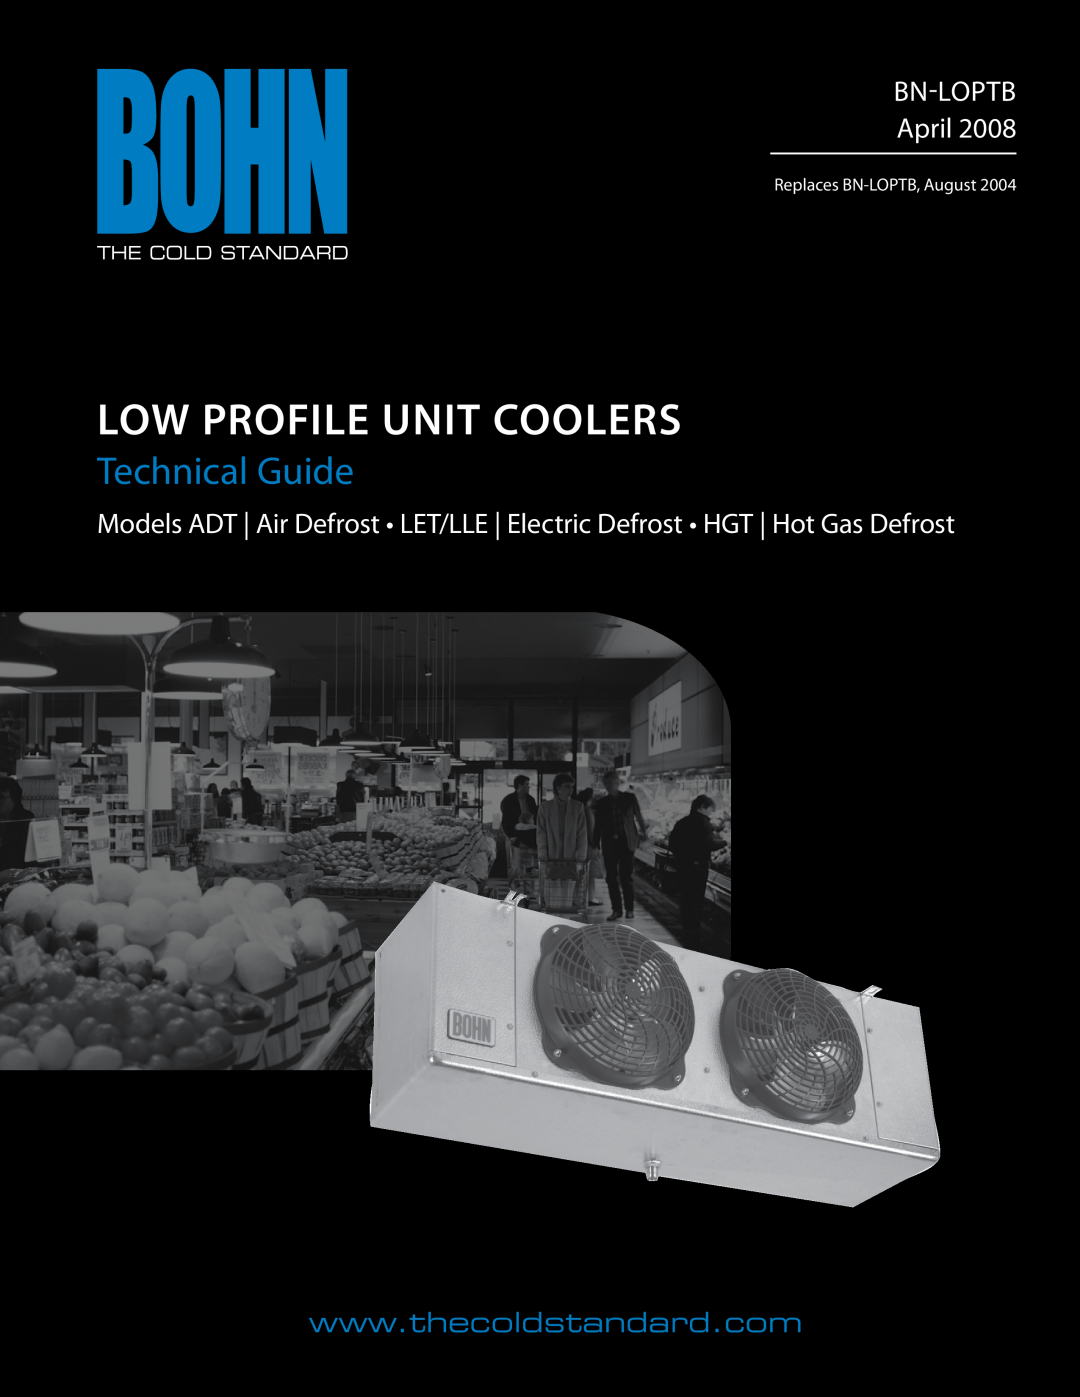 Heatcraft Refrigeration Products BN-LOPTB manual low profile unit coolers, Technical Guide, bn-LOPTBApril 